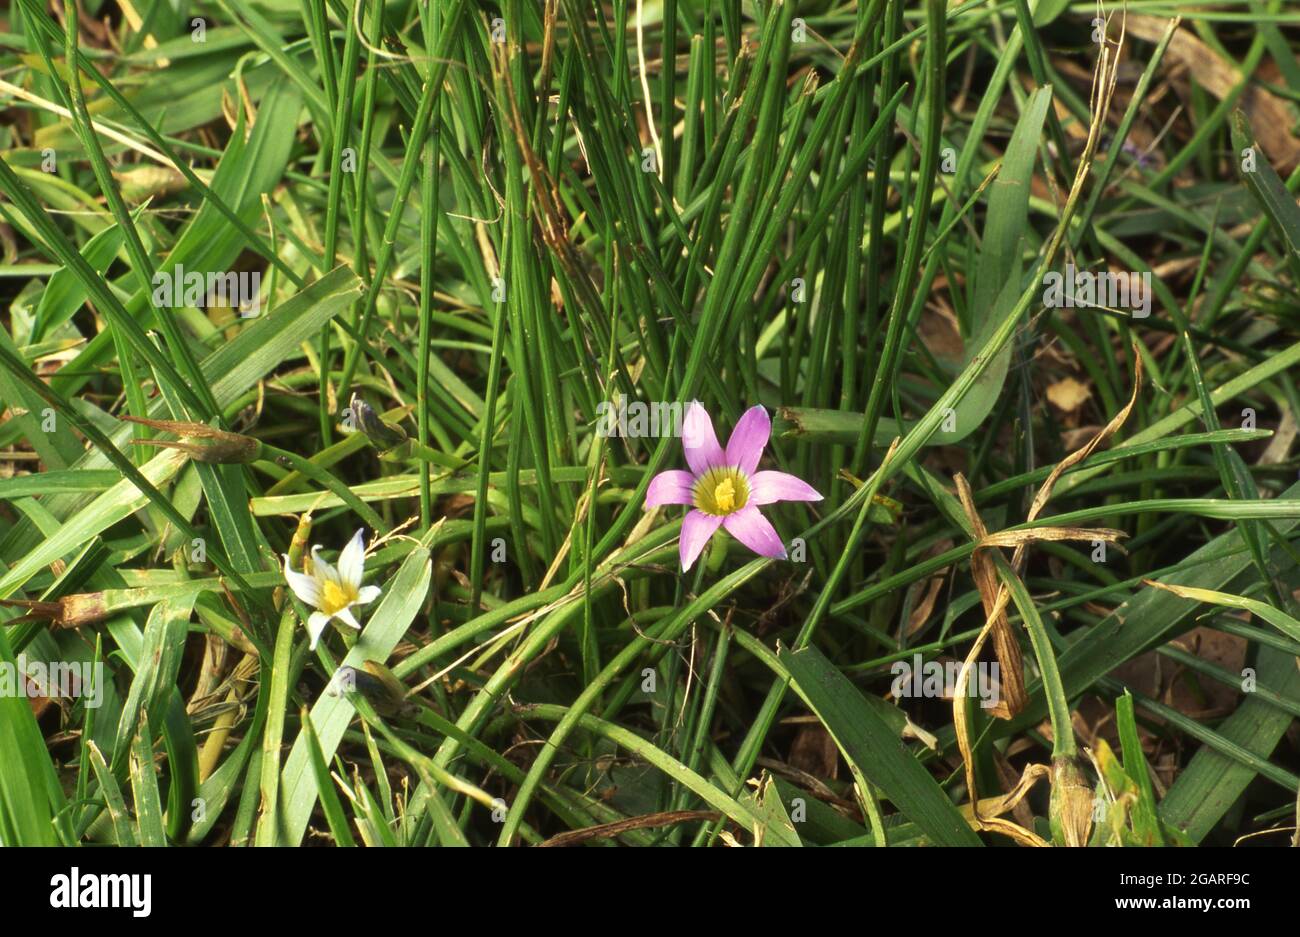 THE LAWN WEED ROMULEA ROSEA VAR AUSTRALIA ALSO KNOWN AS GUILDFORD GRASS GROWING IN GARDEN LAWN Stock Photo